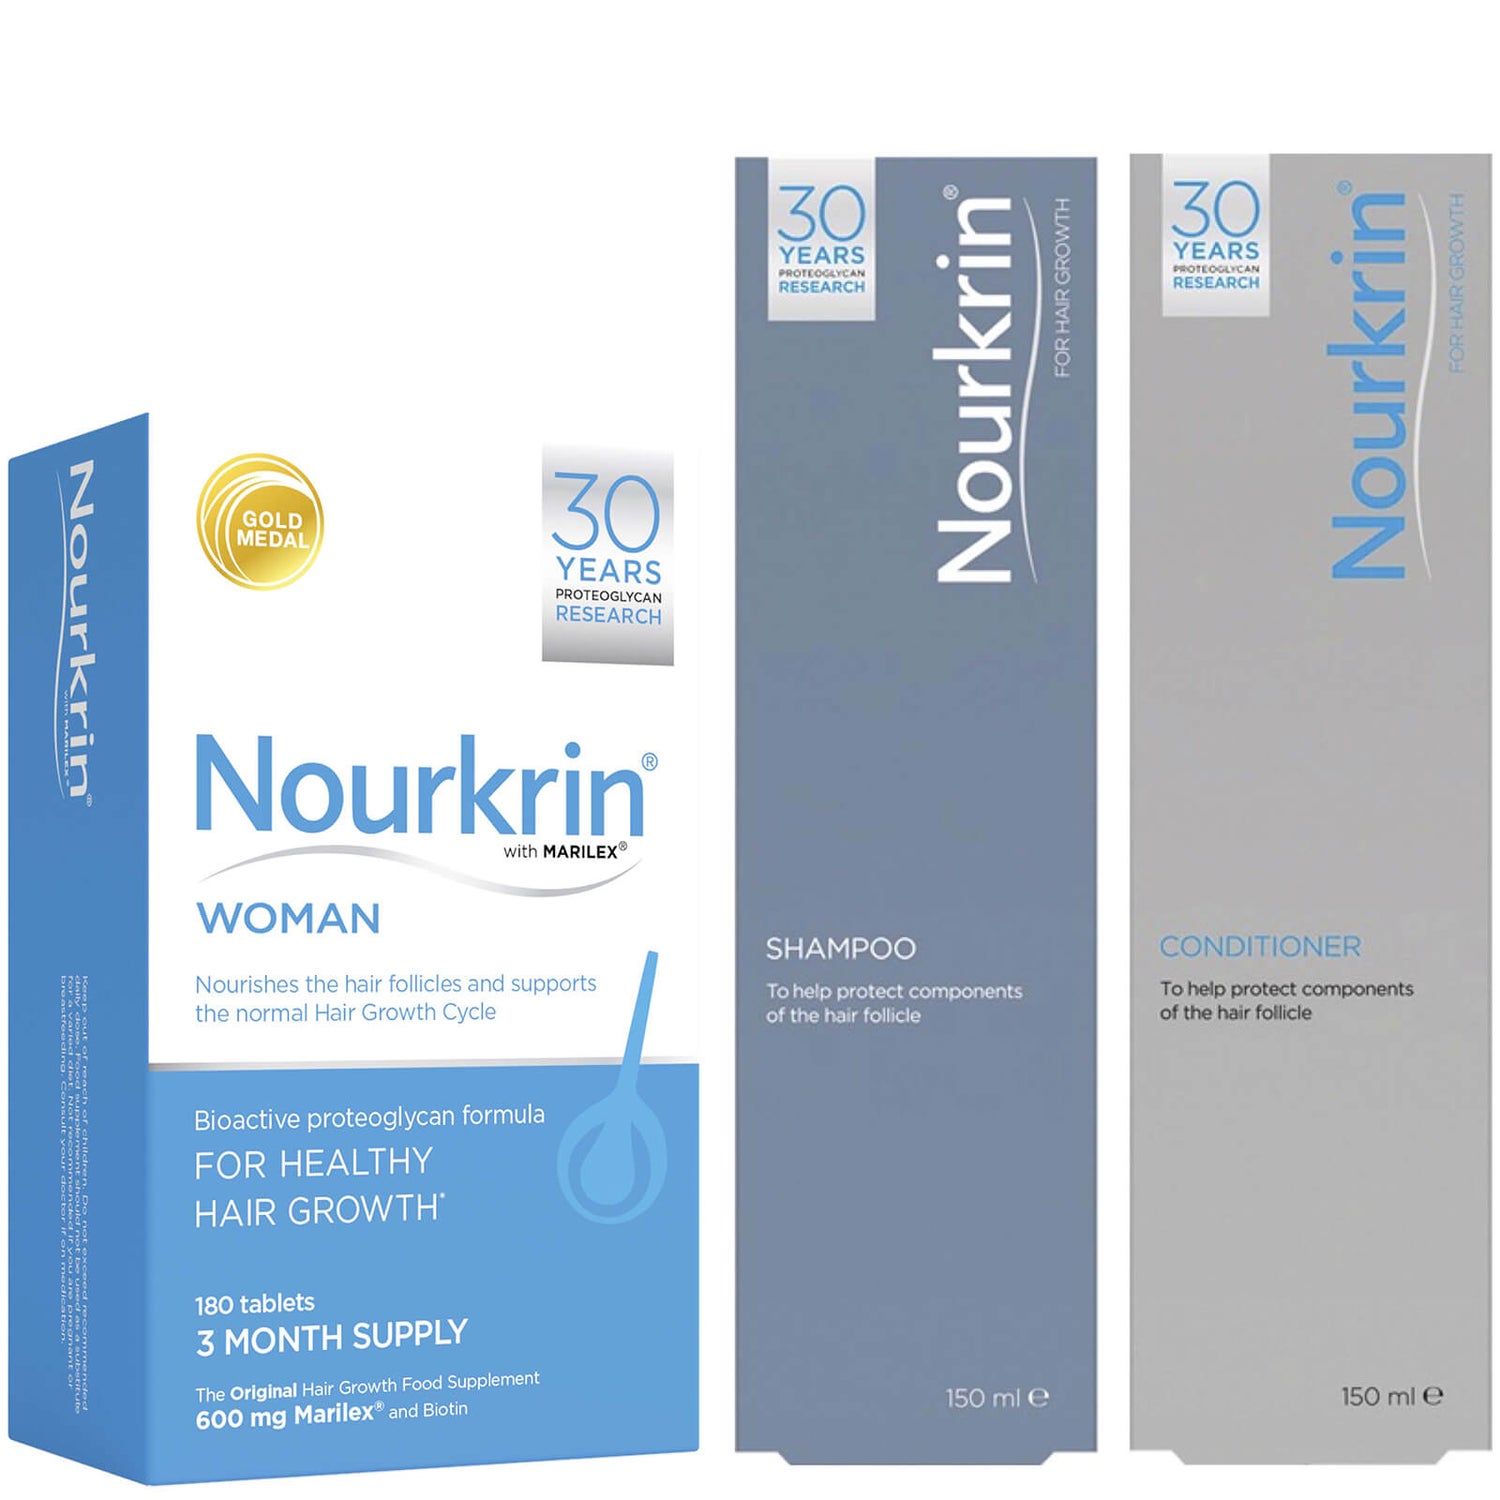 Nourkrin Woman Value Pack - Contains 180 Tablets Plus Shampoo and Conditioner (2x5 oz)